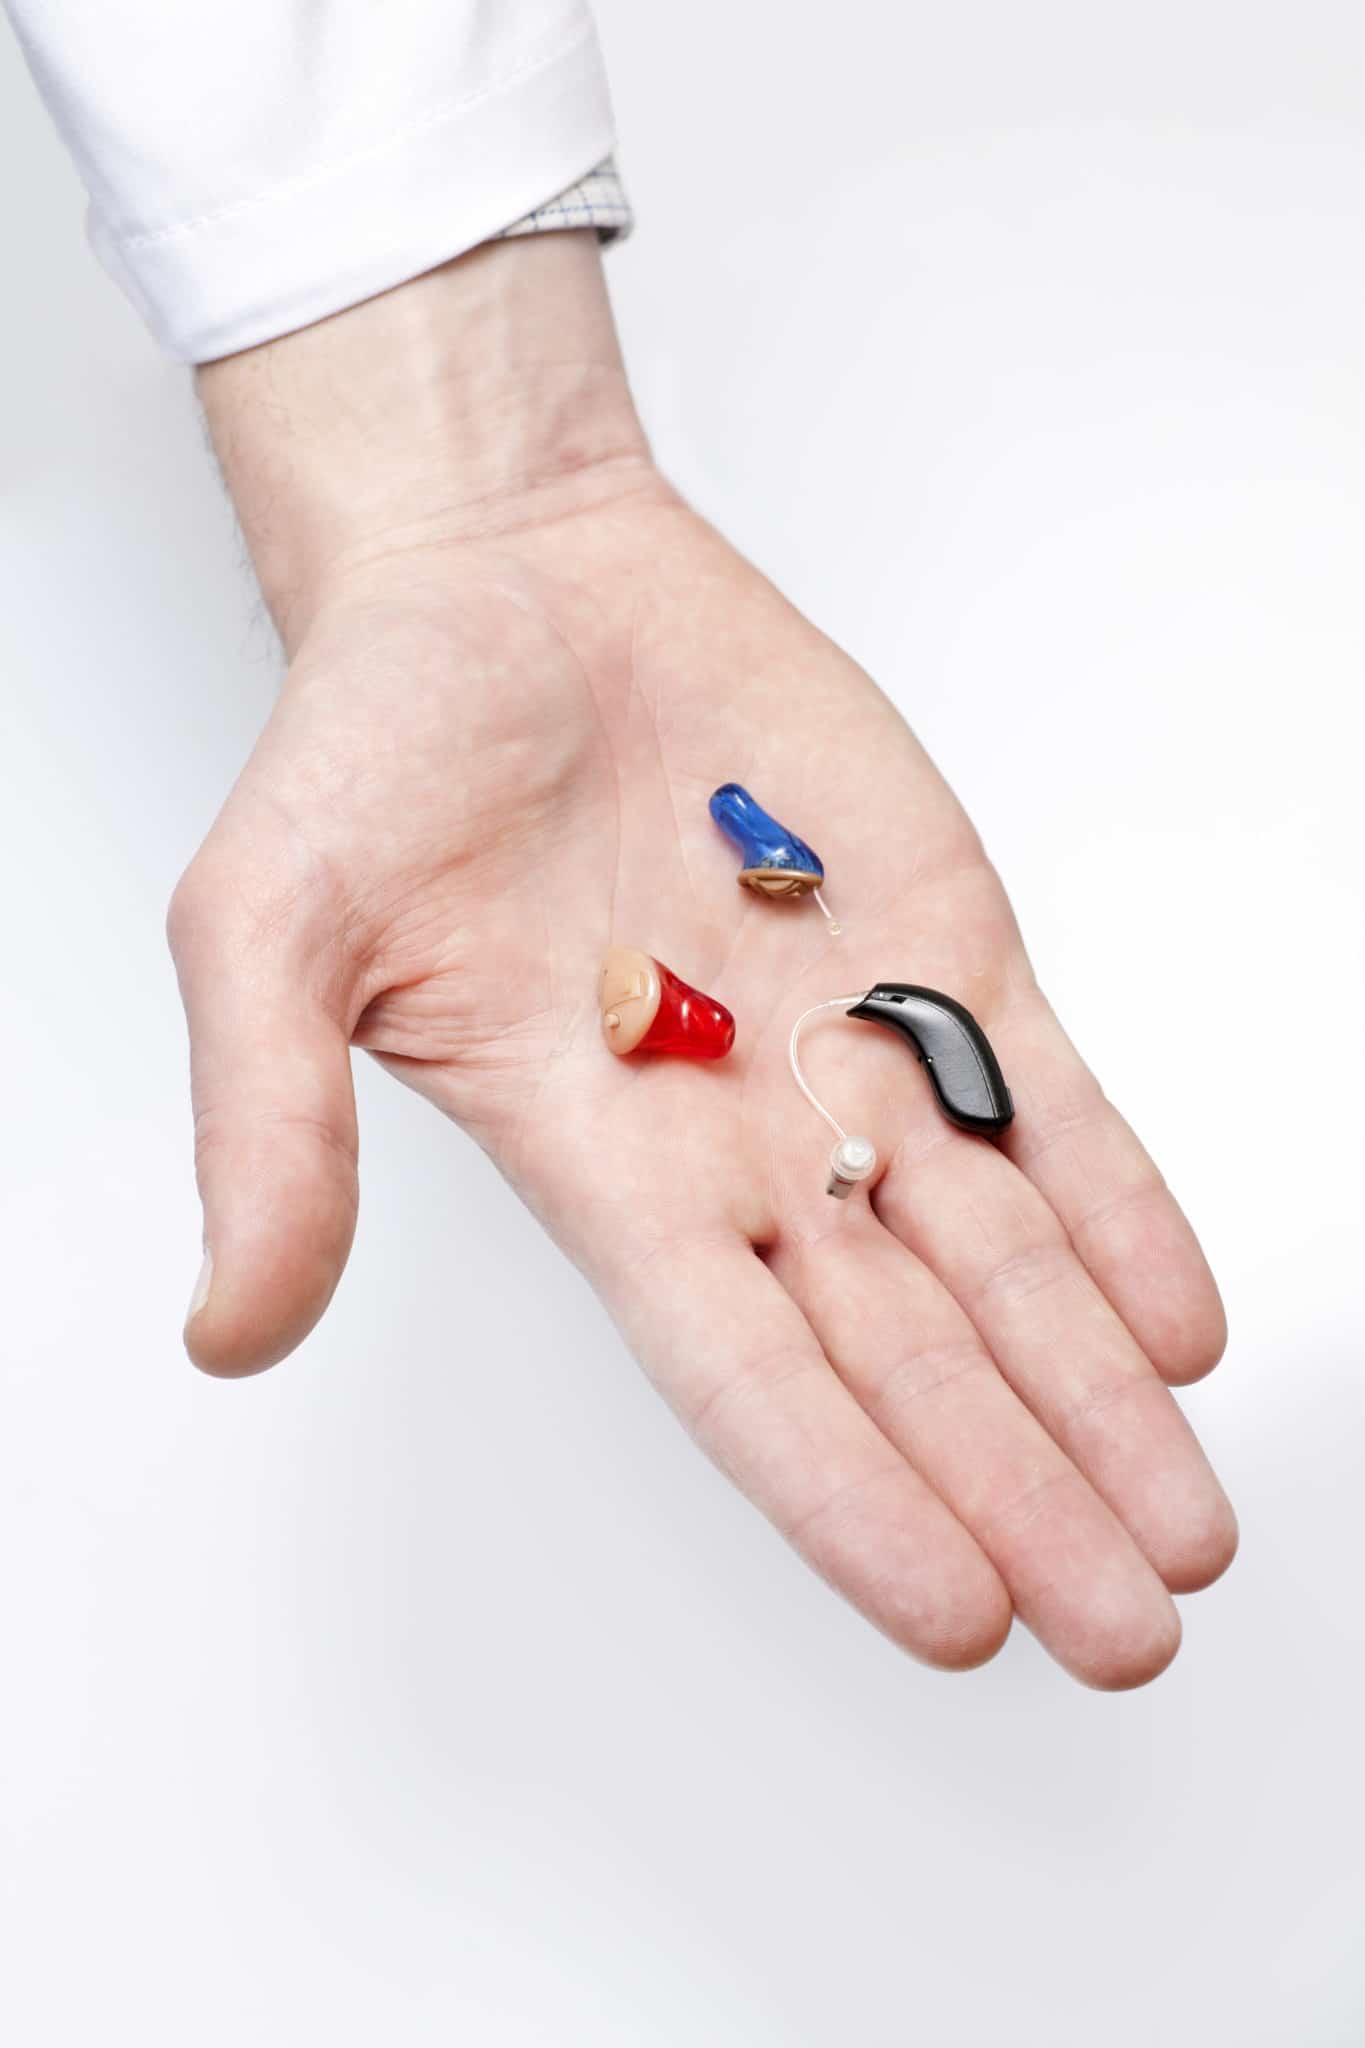 An audiologist's hand holding several hearing aids in Michigan.